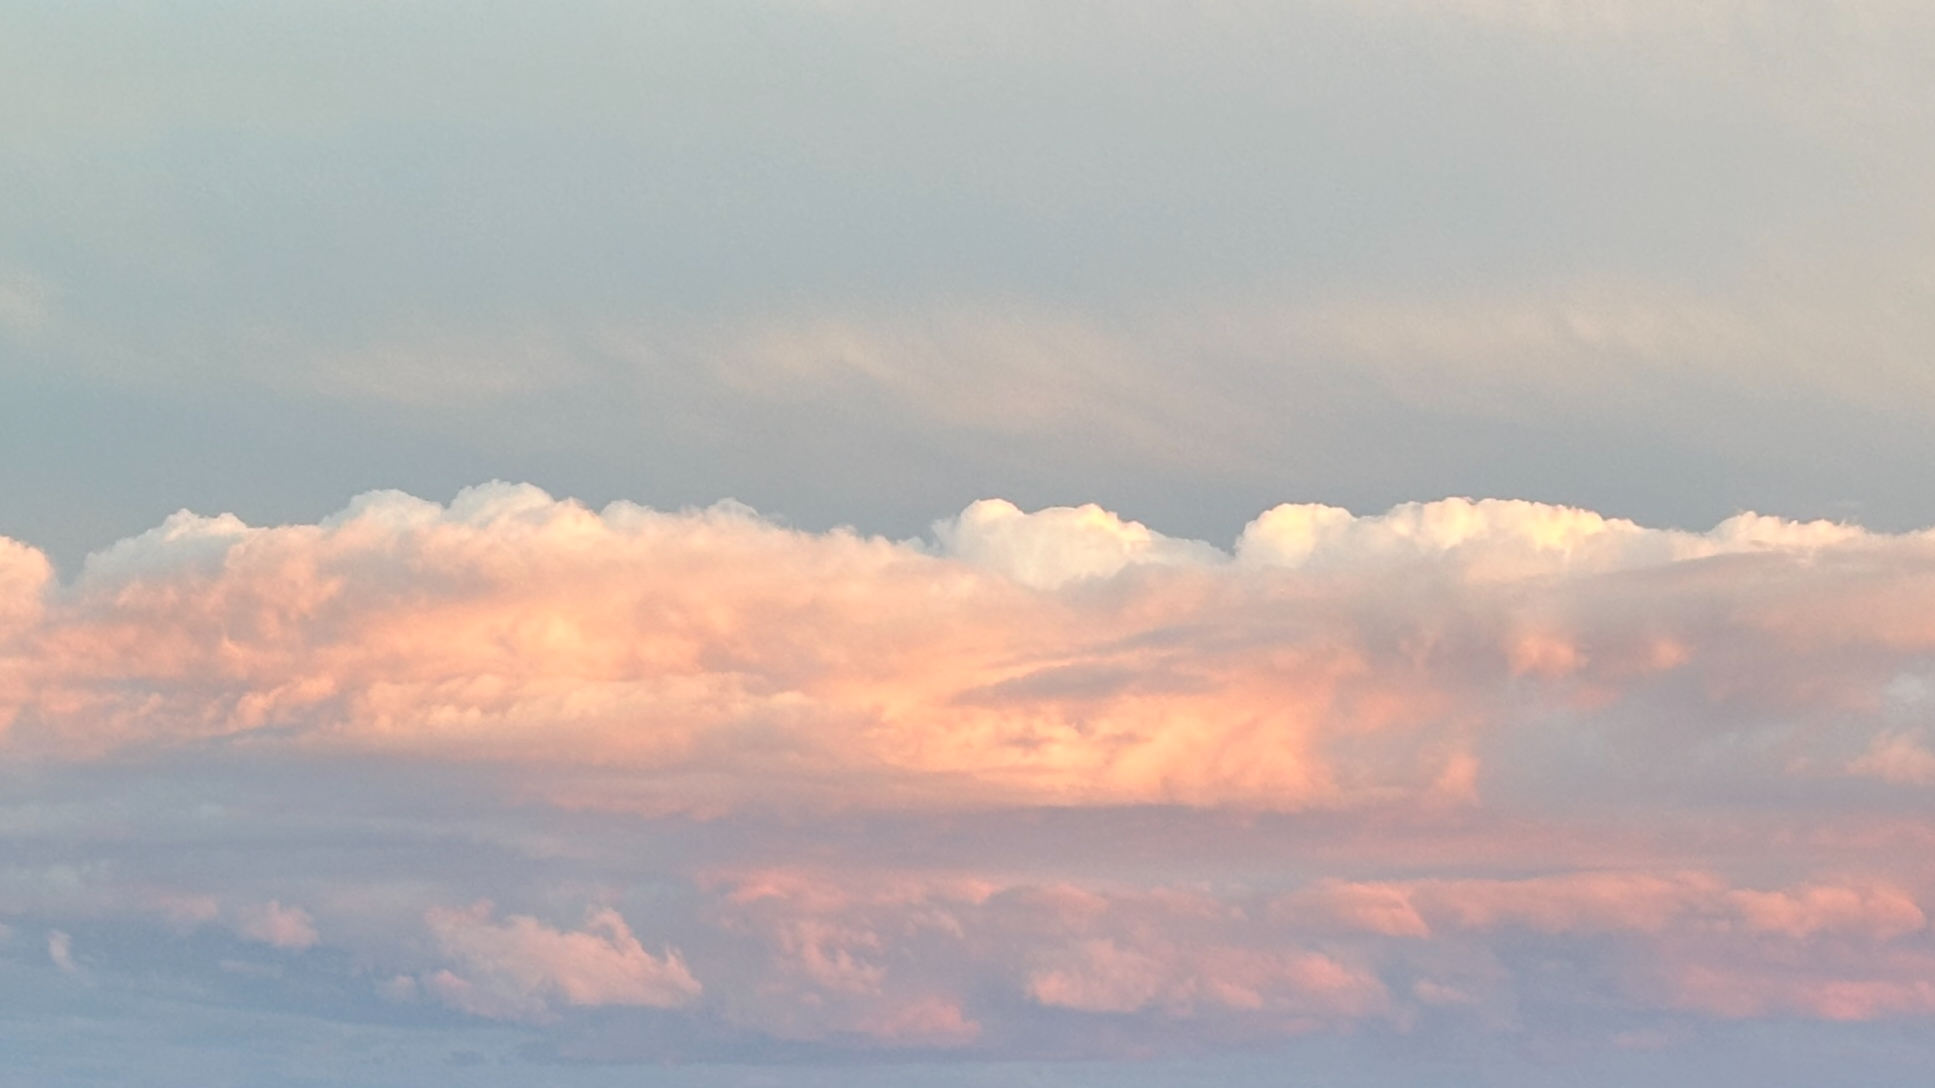 Pink, orange and white clouds against a whispy blue sky